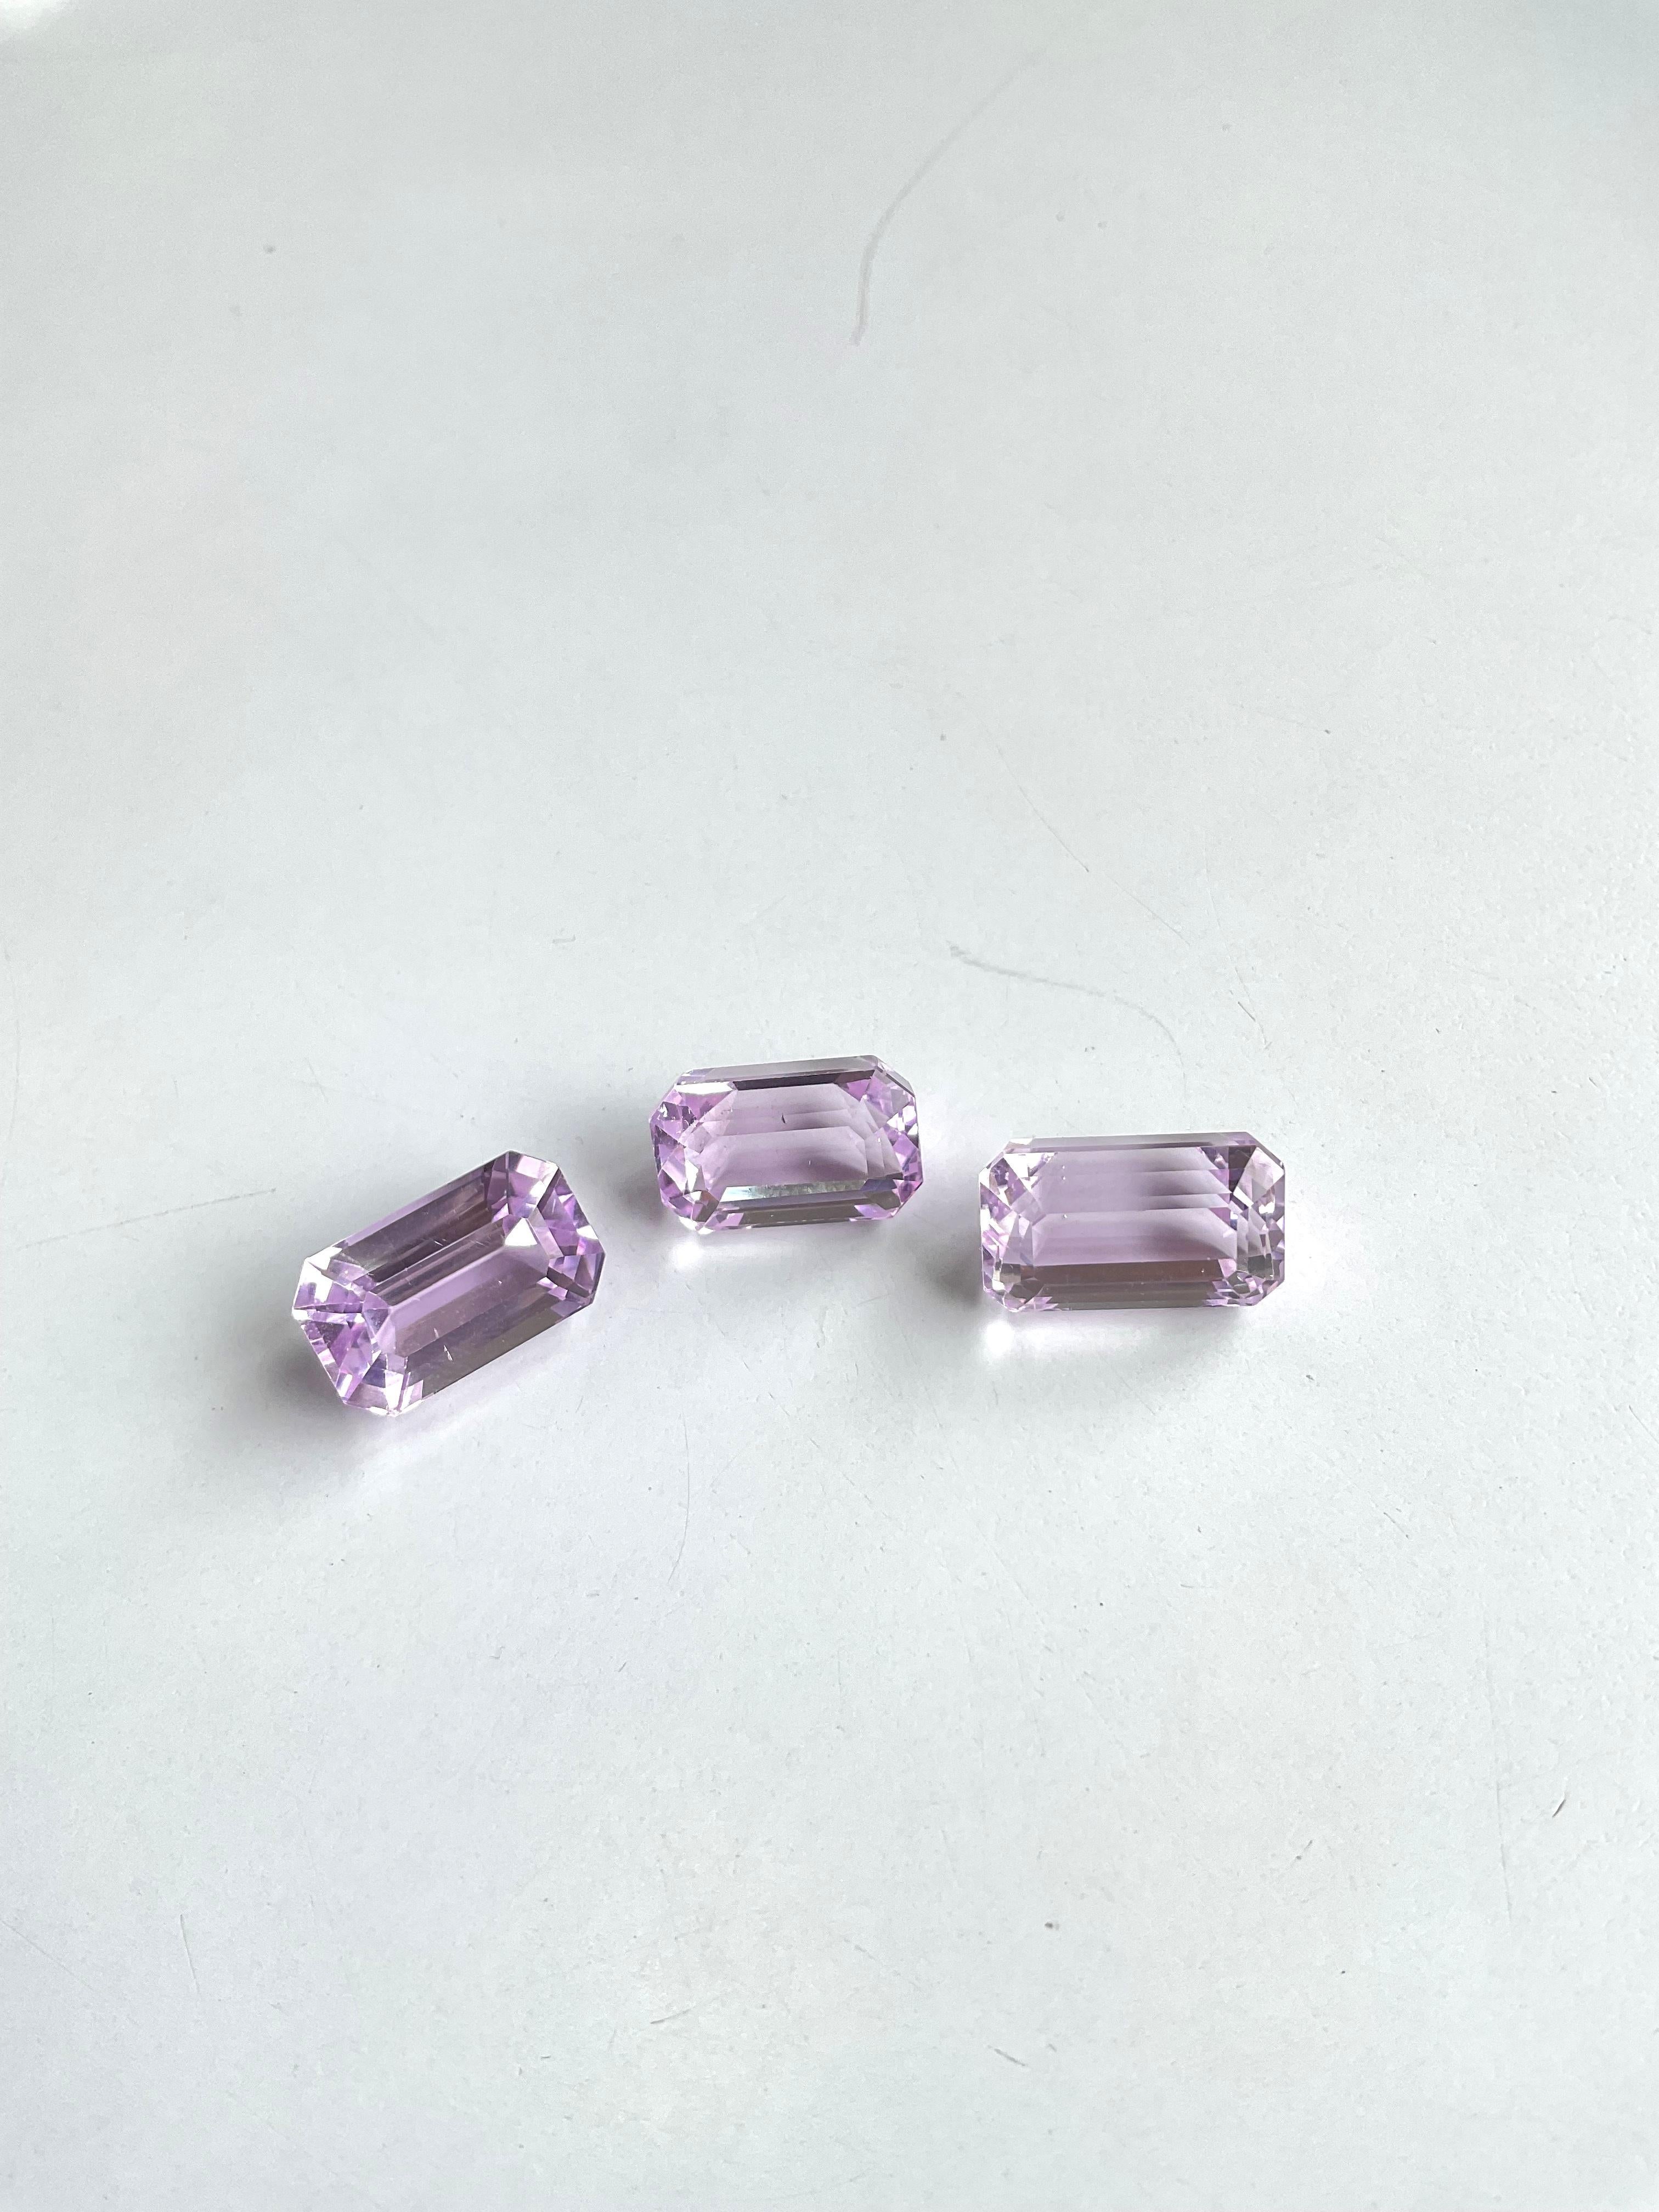 34.29 Carats Pink Kunzite Octagon Natural Cut Stones For Fine Gem Jewellery For Sale 2